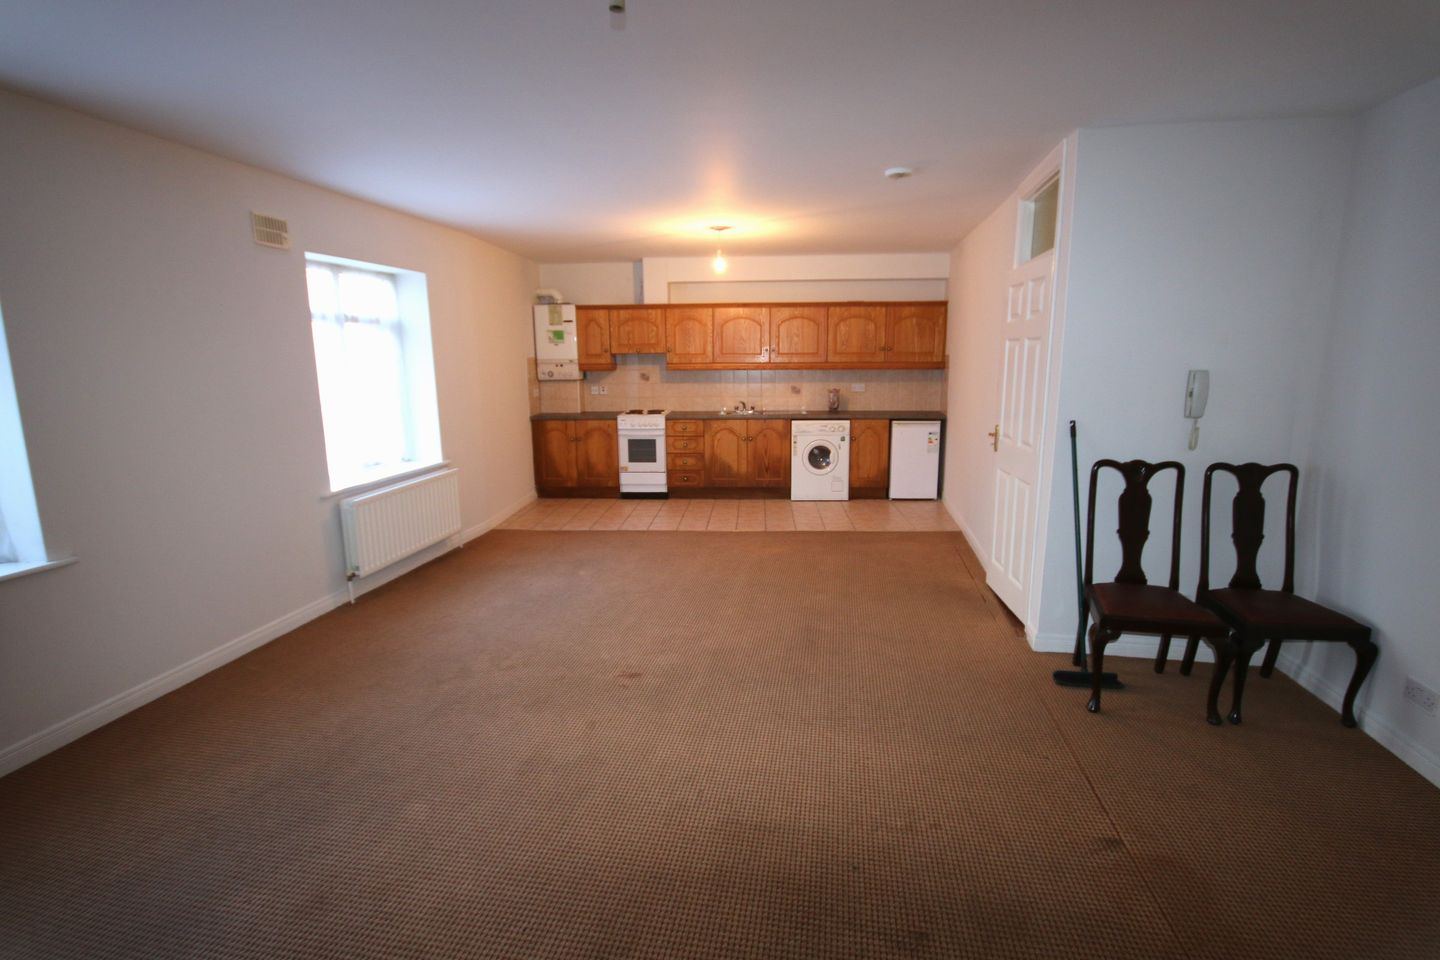 Apartment 34, Riverside View, Letterkenny, Co. Donegal